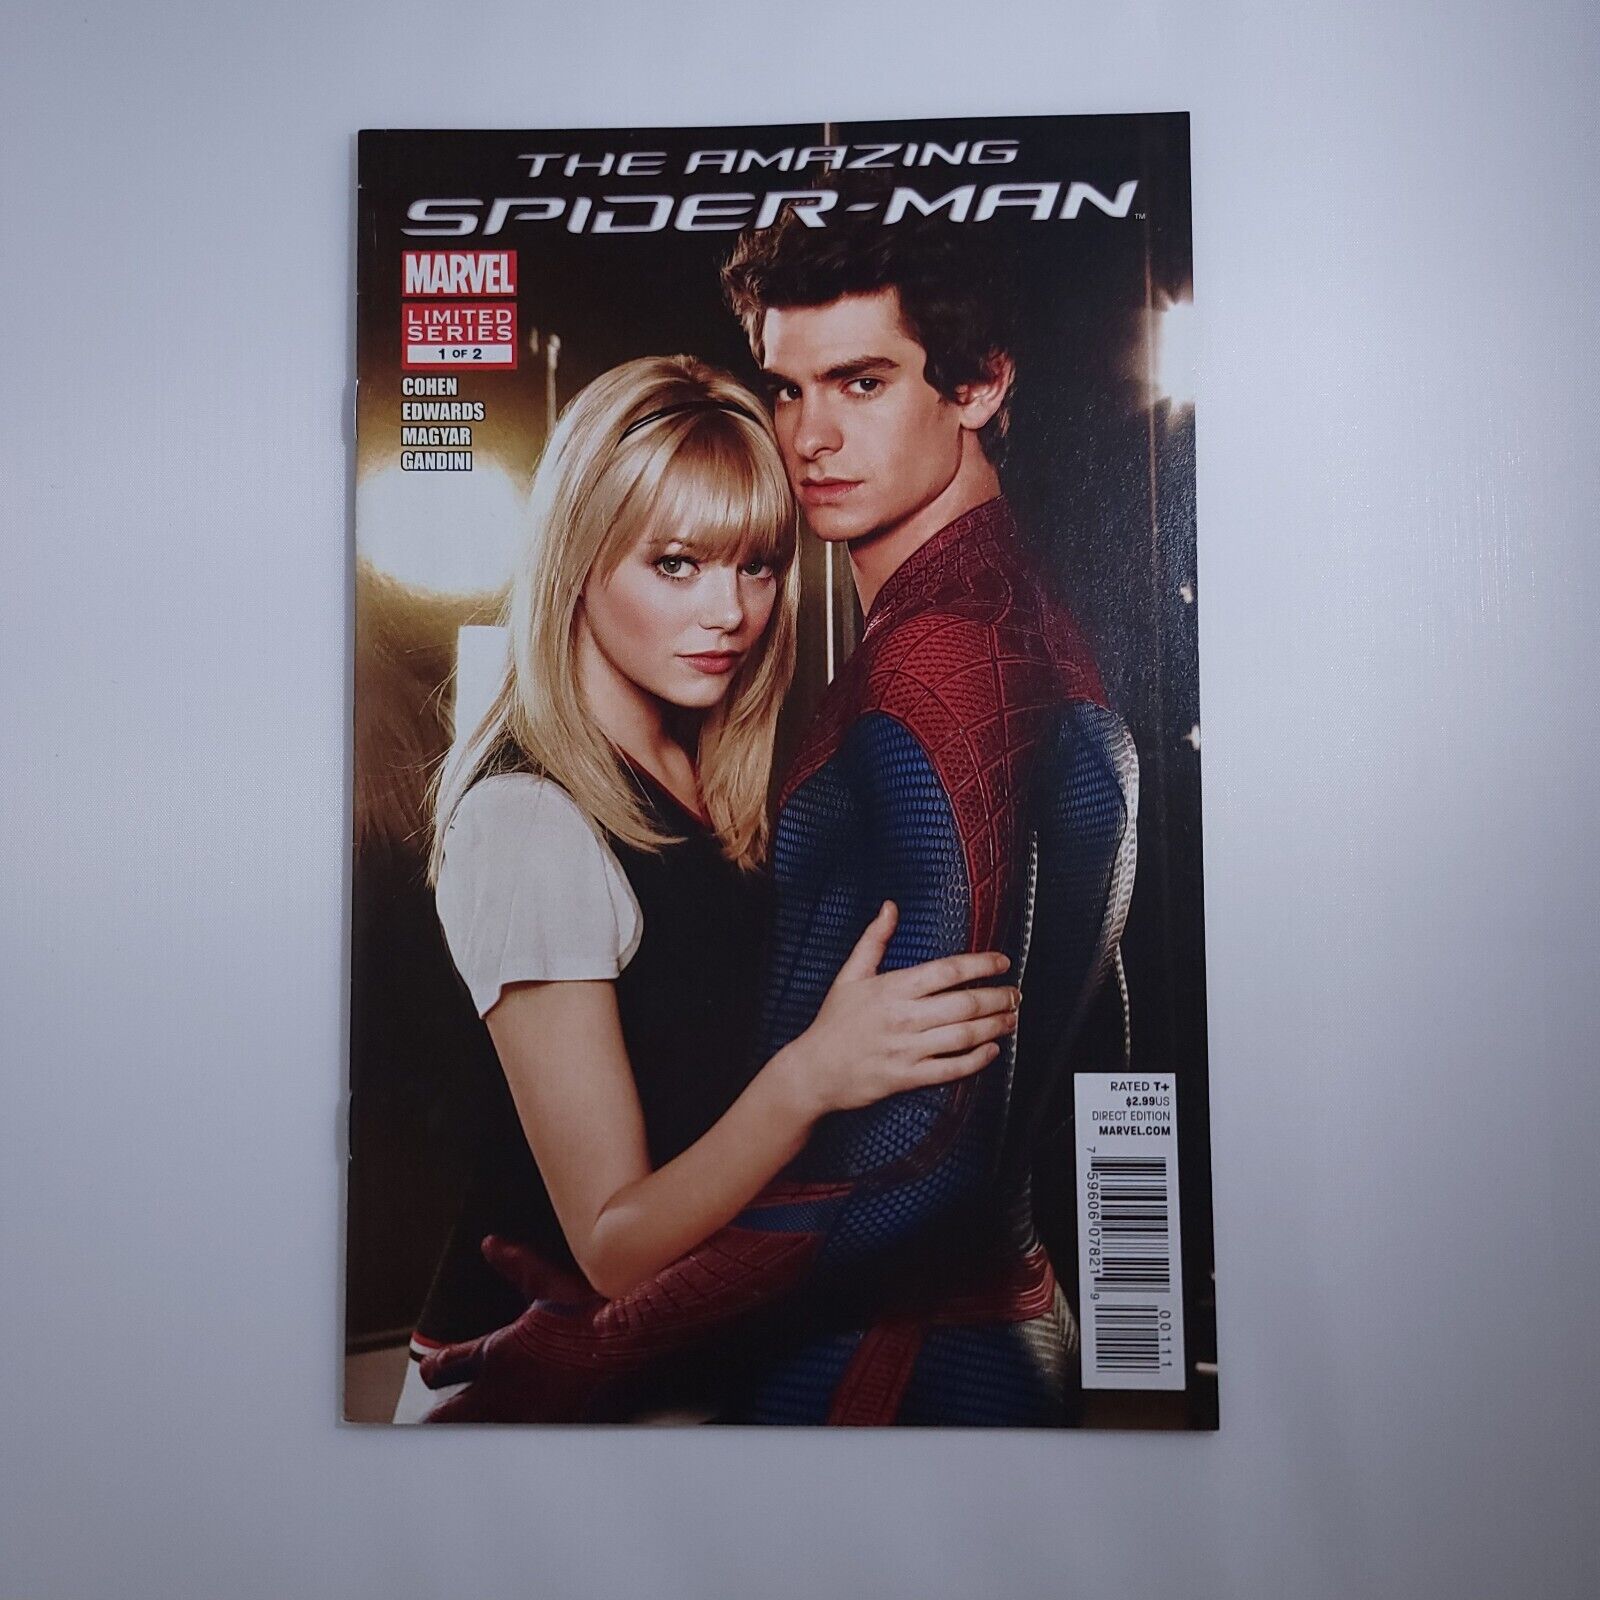 The Amazing Spider-Man The Official Movie Adaption #1 Comic Book